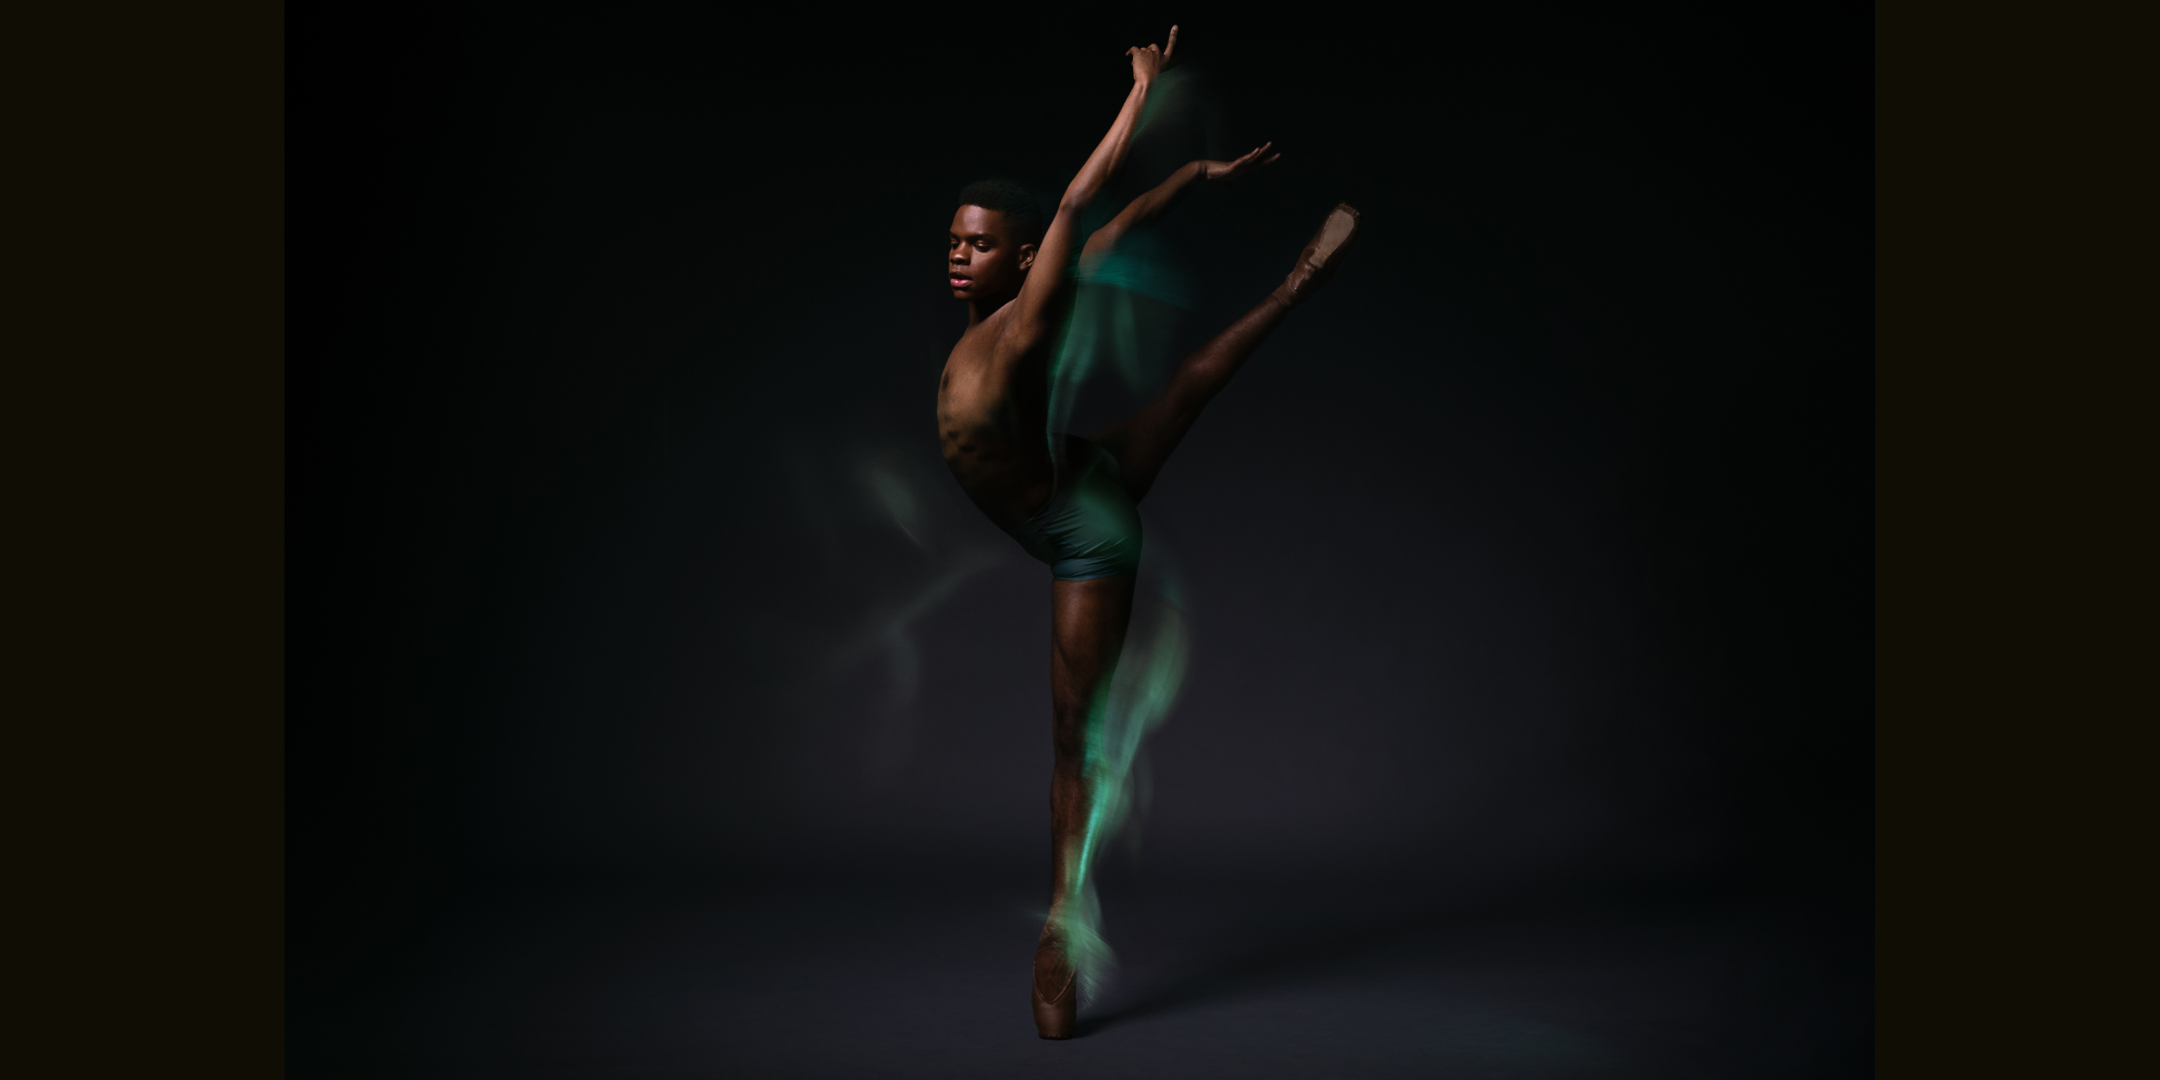 Daniel R. Durrett poses in a dramatic attitude croise derriere on pointe, in front of a pitch black background. Green and purple wisps of color trace their bottom leg and arms.